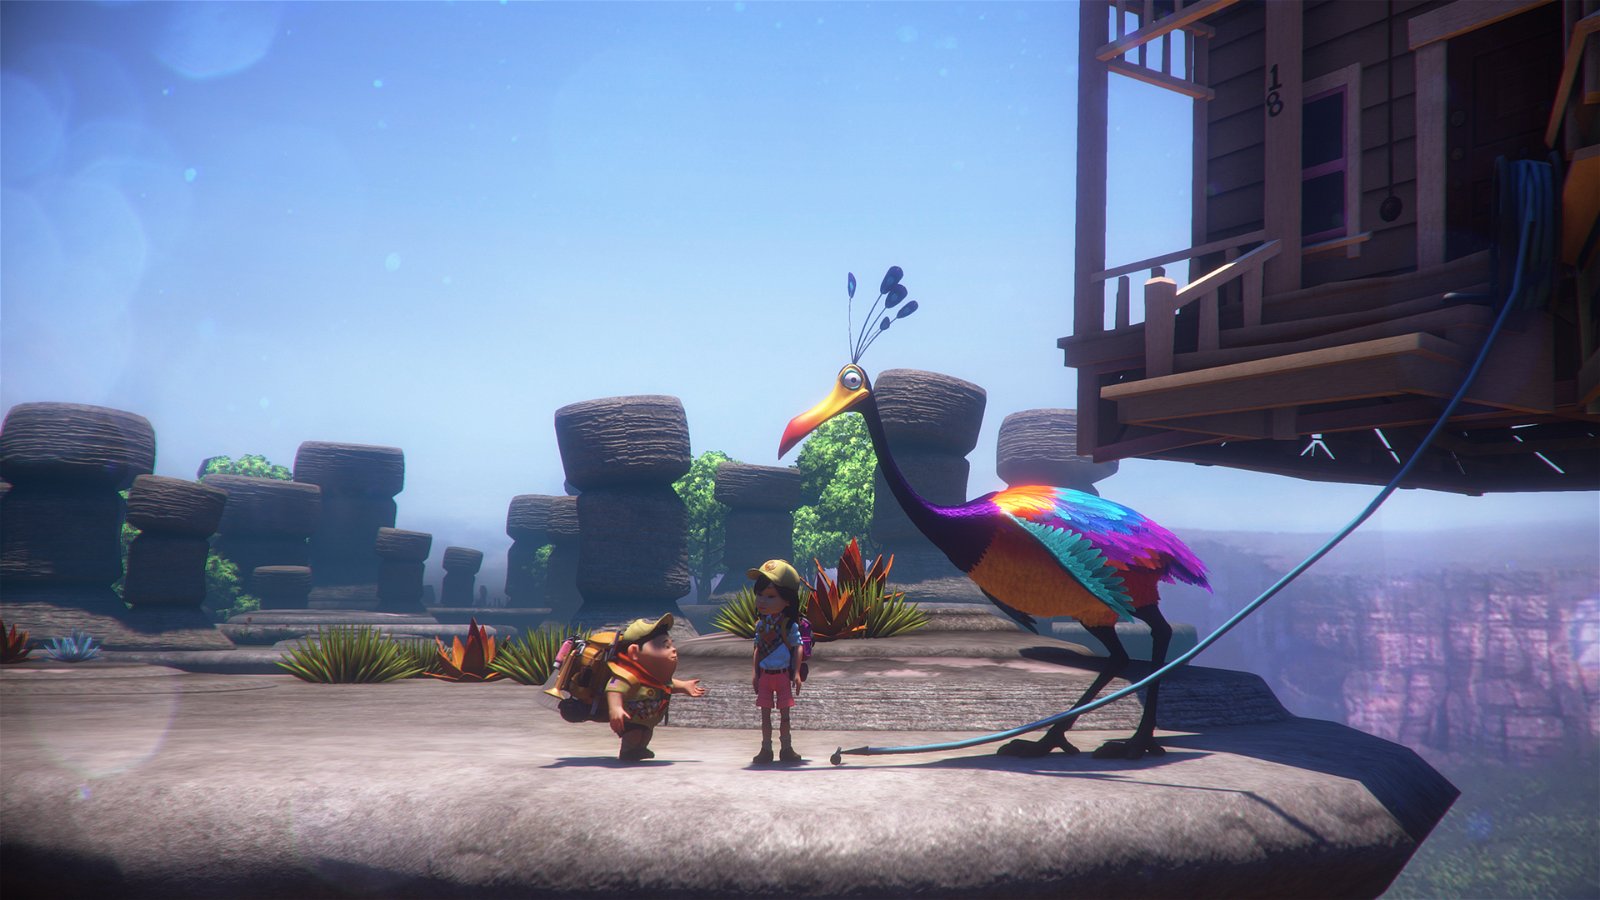 Rush: A Disney Pixar Adventure (Xbox One) Review – A little New Unnecessary 3